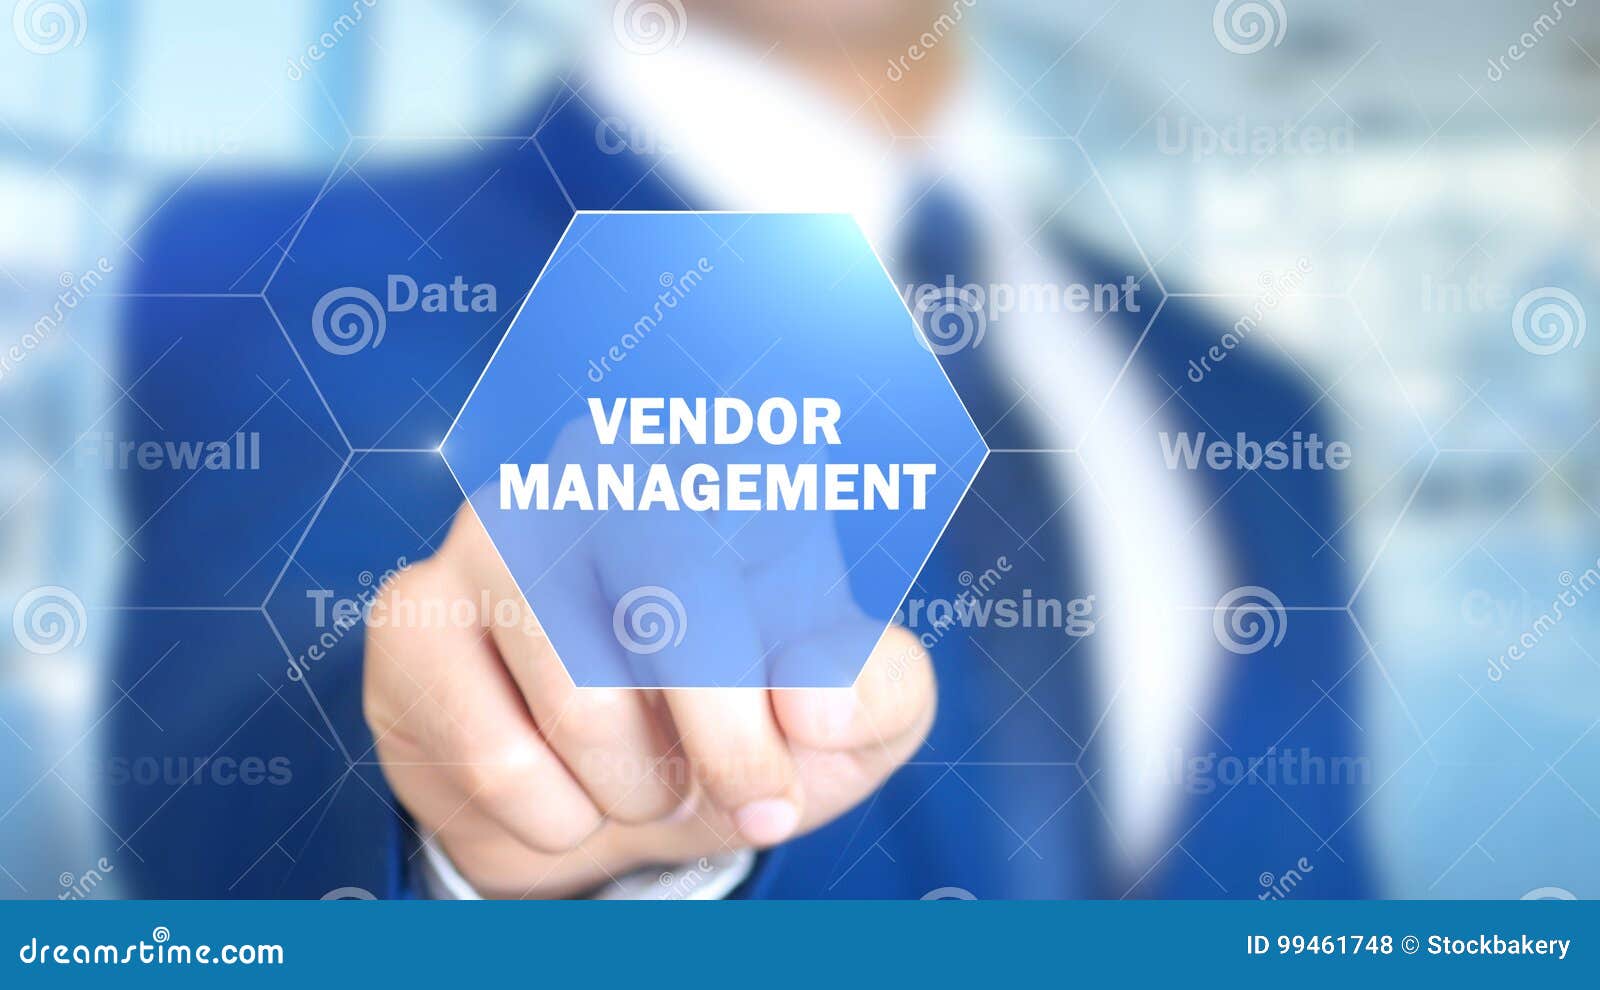 vendor management, man working on holographic interface, visual screen